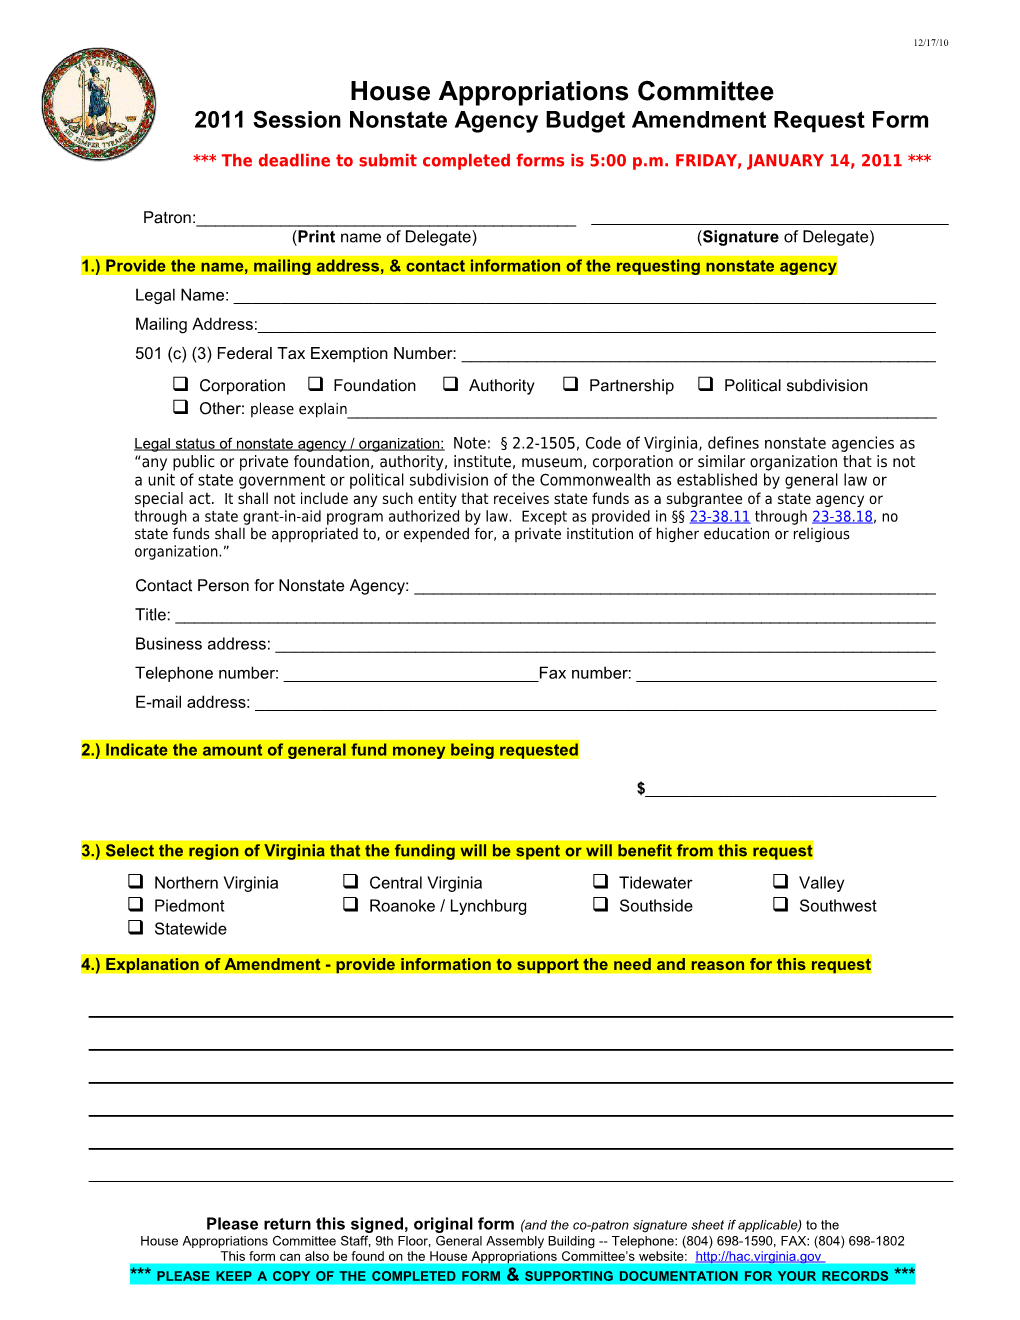 2011 Session Nonstate Agency Budget Amendment Request Form